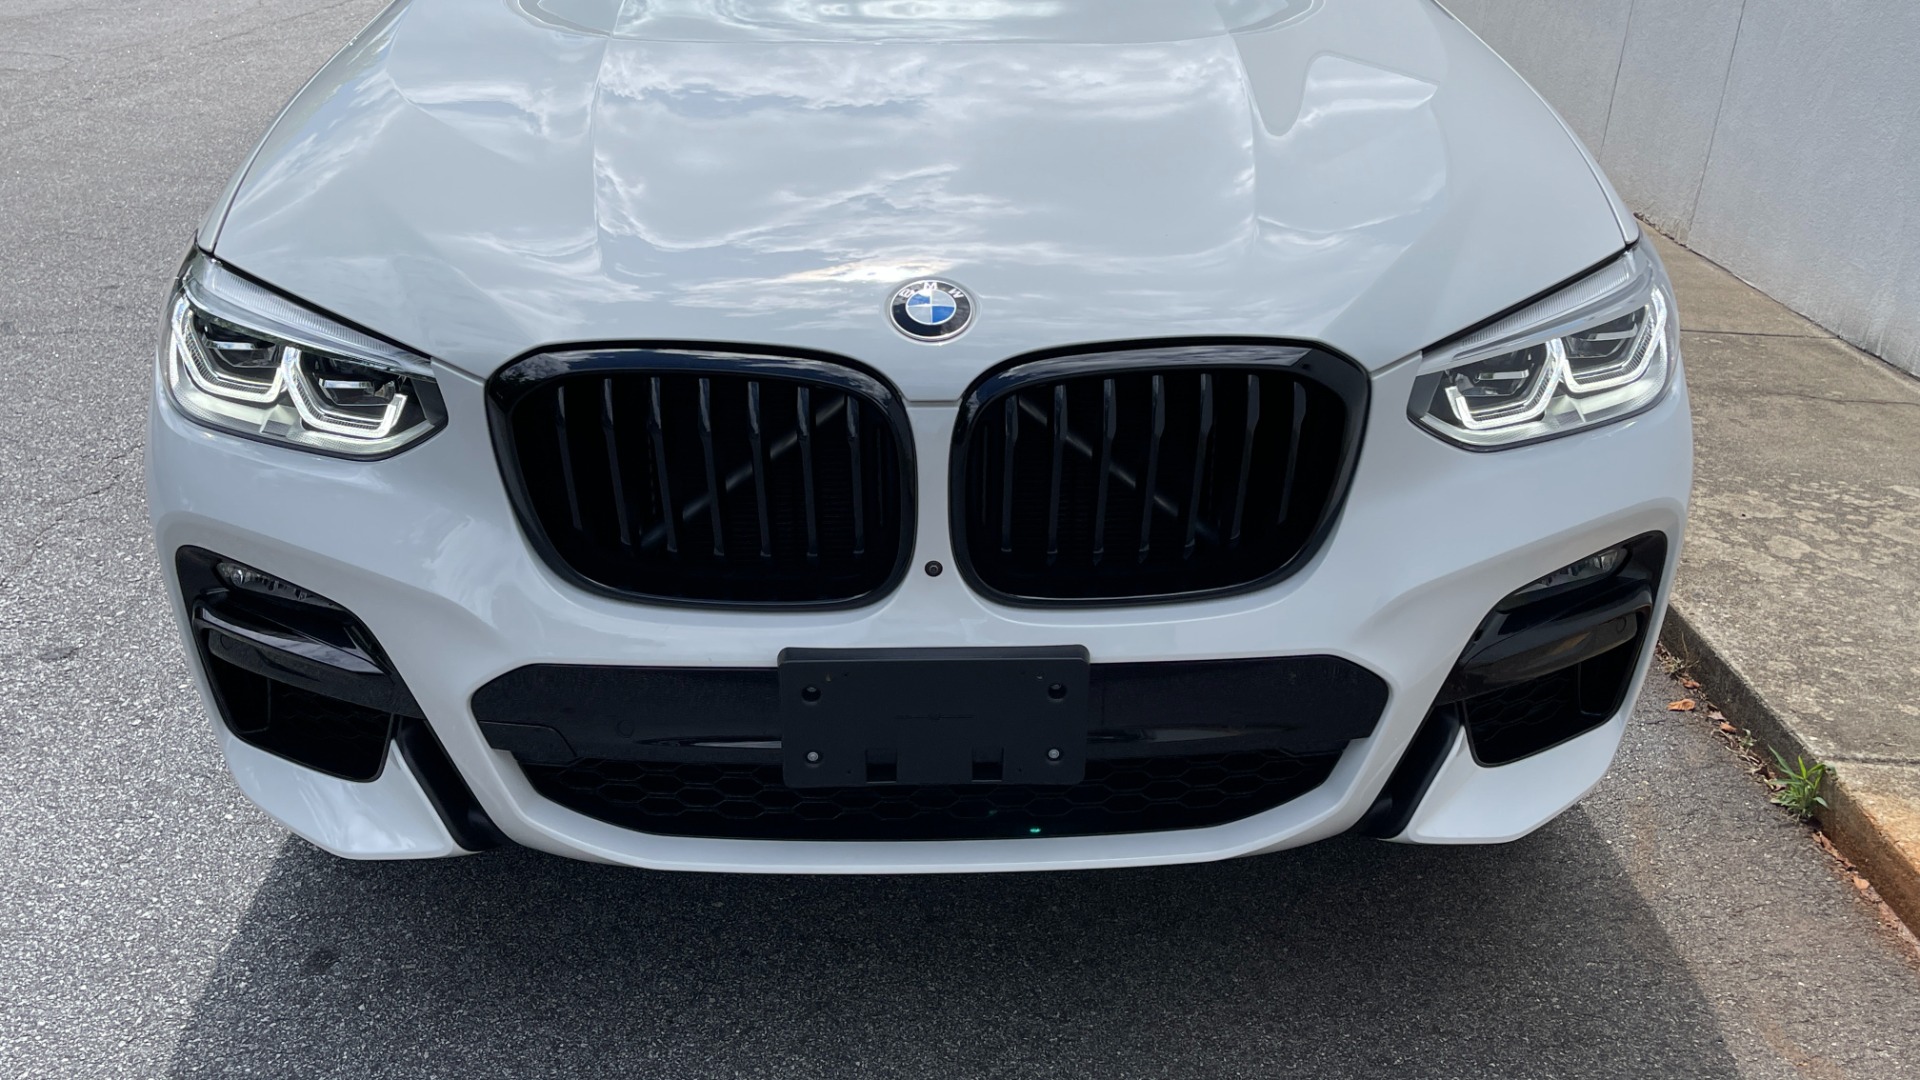 Used 2021 BMW X3 M40i / EXECUTIVE PACKAGE / SHADOWLINE TRIM / HEADS UP DISPLAY / AMBIENT LIG for sale $58,995 at Formula Imports in Charlotte NC 28227 6